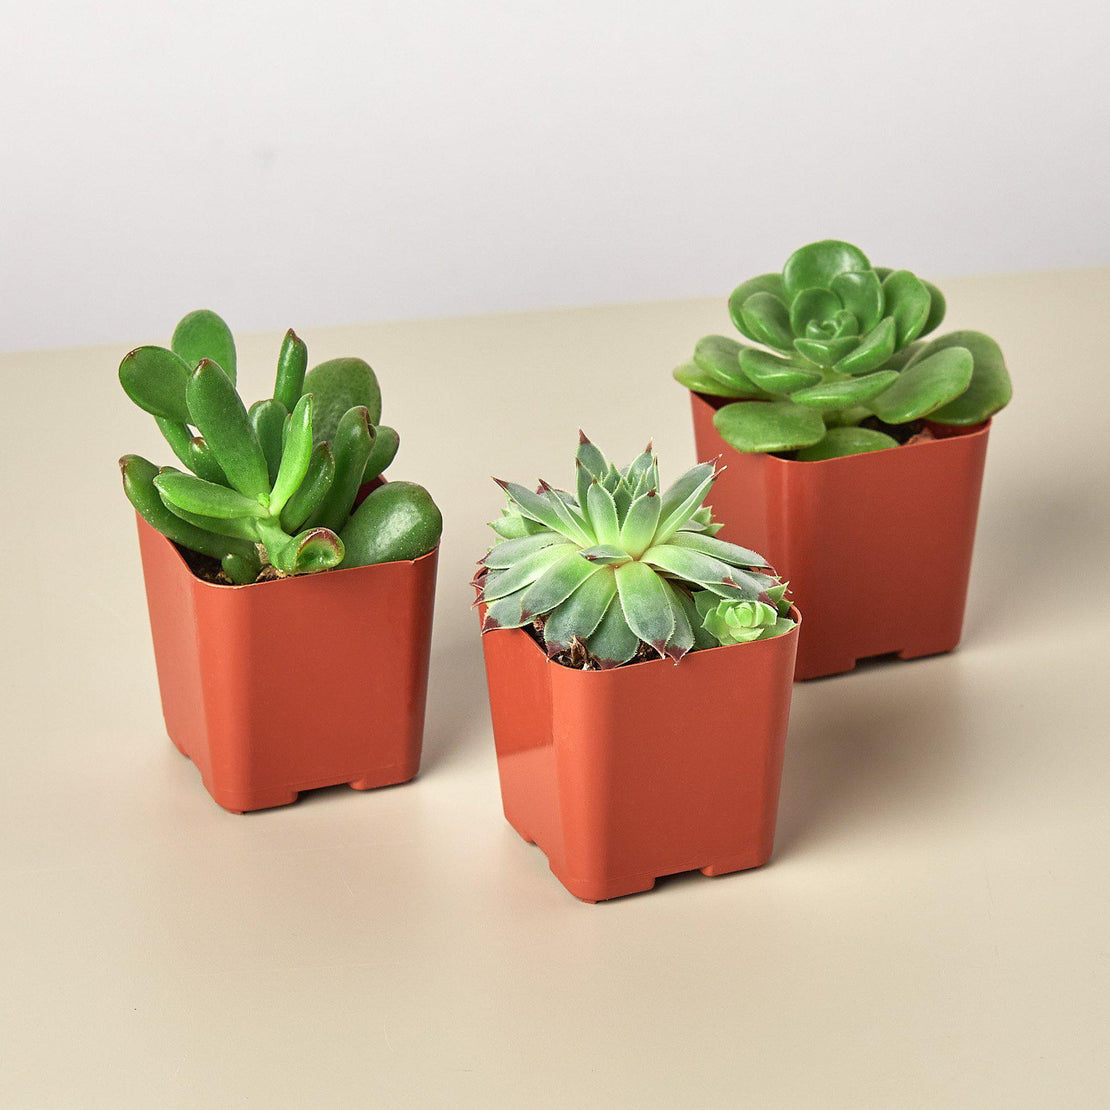 3 Succulent Variety Pack - 2.0